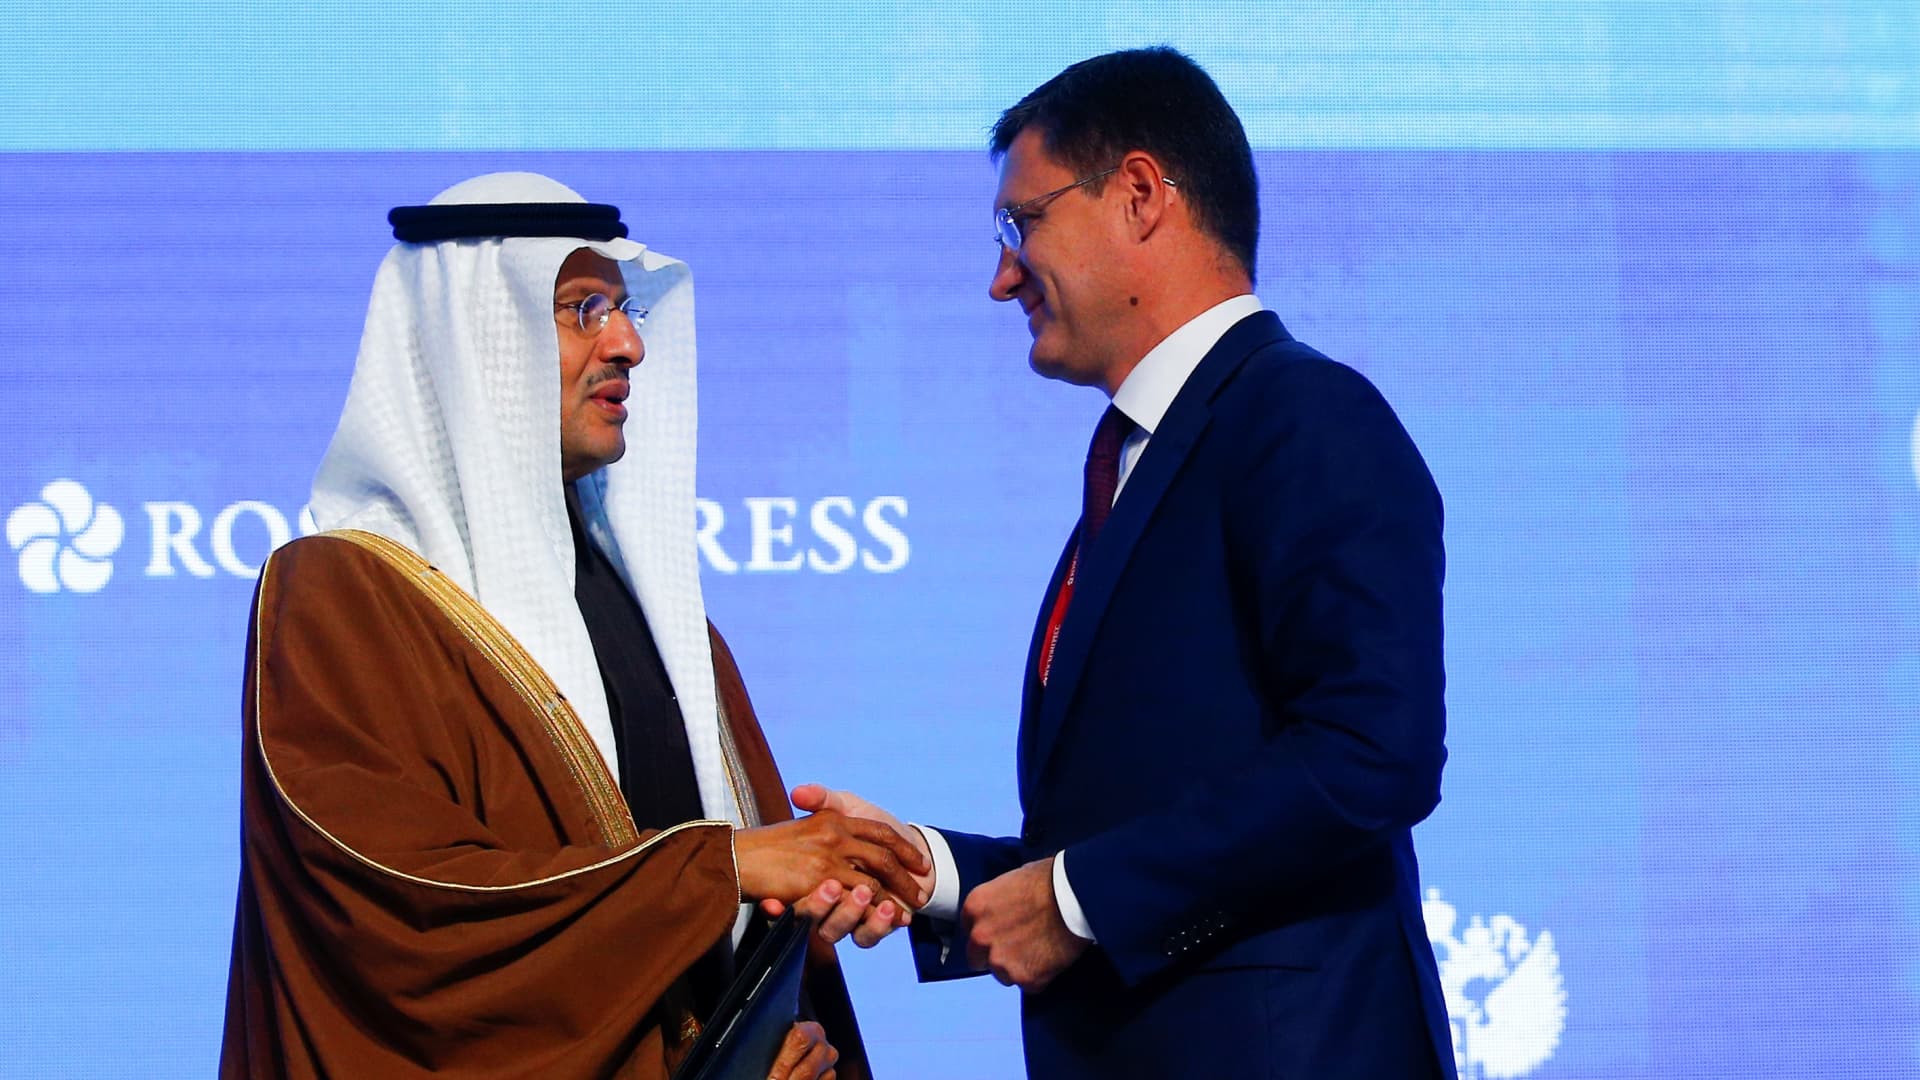 Then Russian Minister of Energy Alexander Novak (right) with Saudi Arabia's Energy Minister, Prince Abdulaziz bin Salman, during the Russian Energy Week 2019 International Forum in Moscow. OPEC delegates are reportedly concerned about the growing economic pressure on Russia and its ability to pump more crude to cool soaring prices.